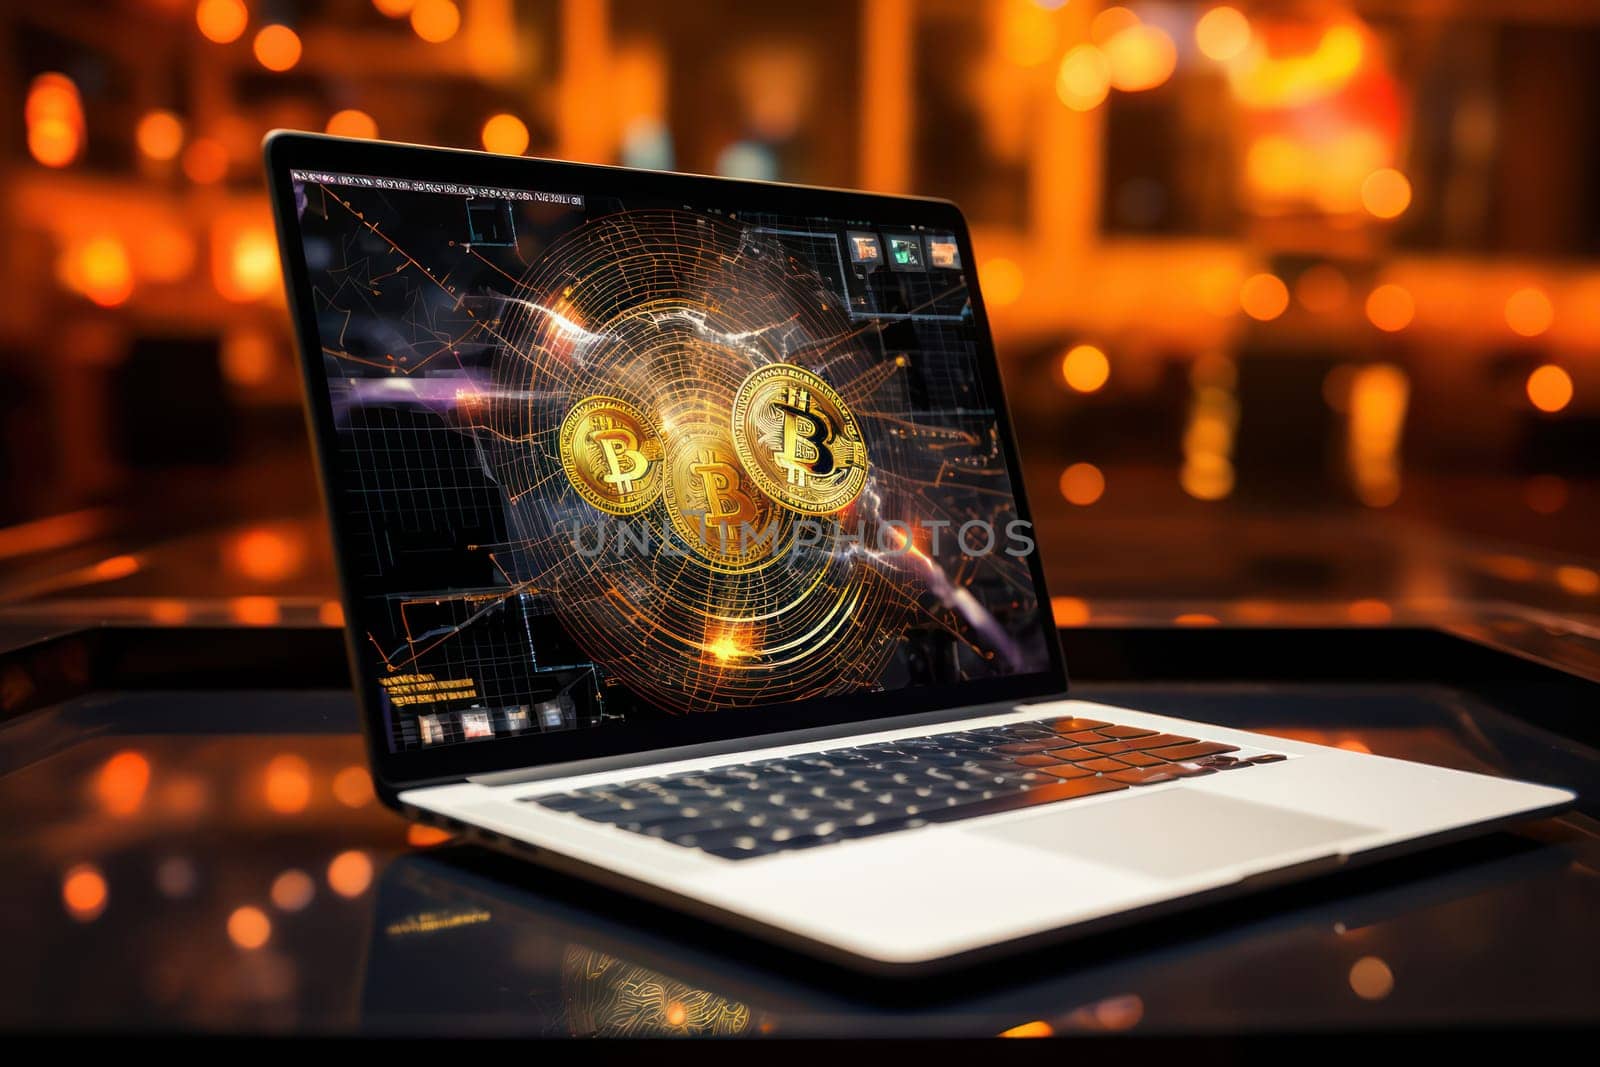 Cryptocurrency Commerce: A Closeup of the Golden Bitcoin Coin on a Digital Laptop Keyboard with a Virtual Currency Concept and Global Financial Background